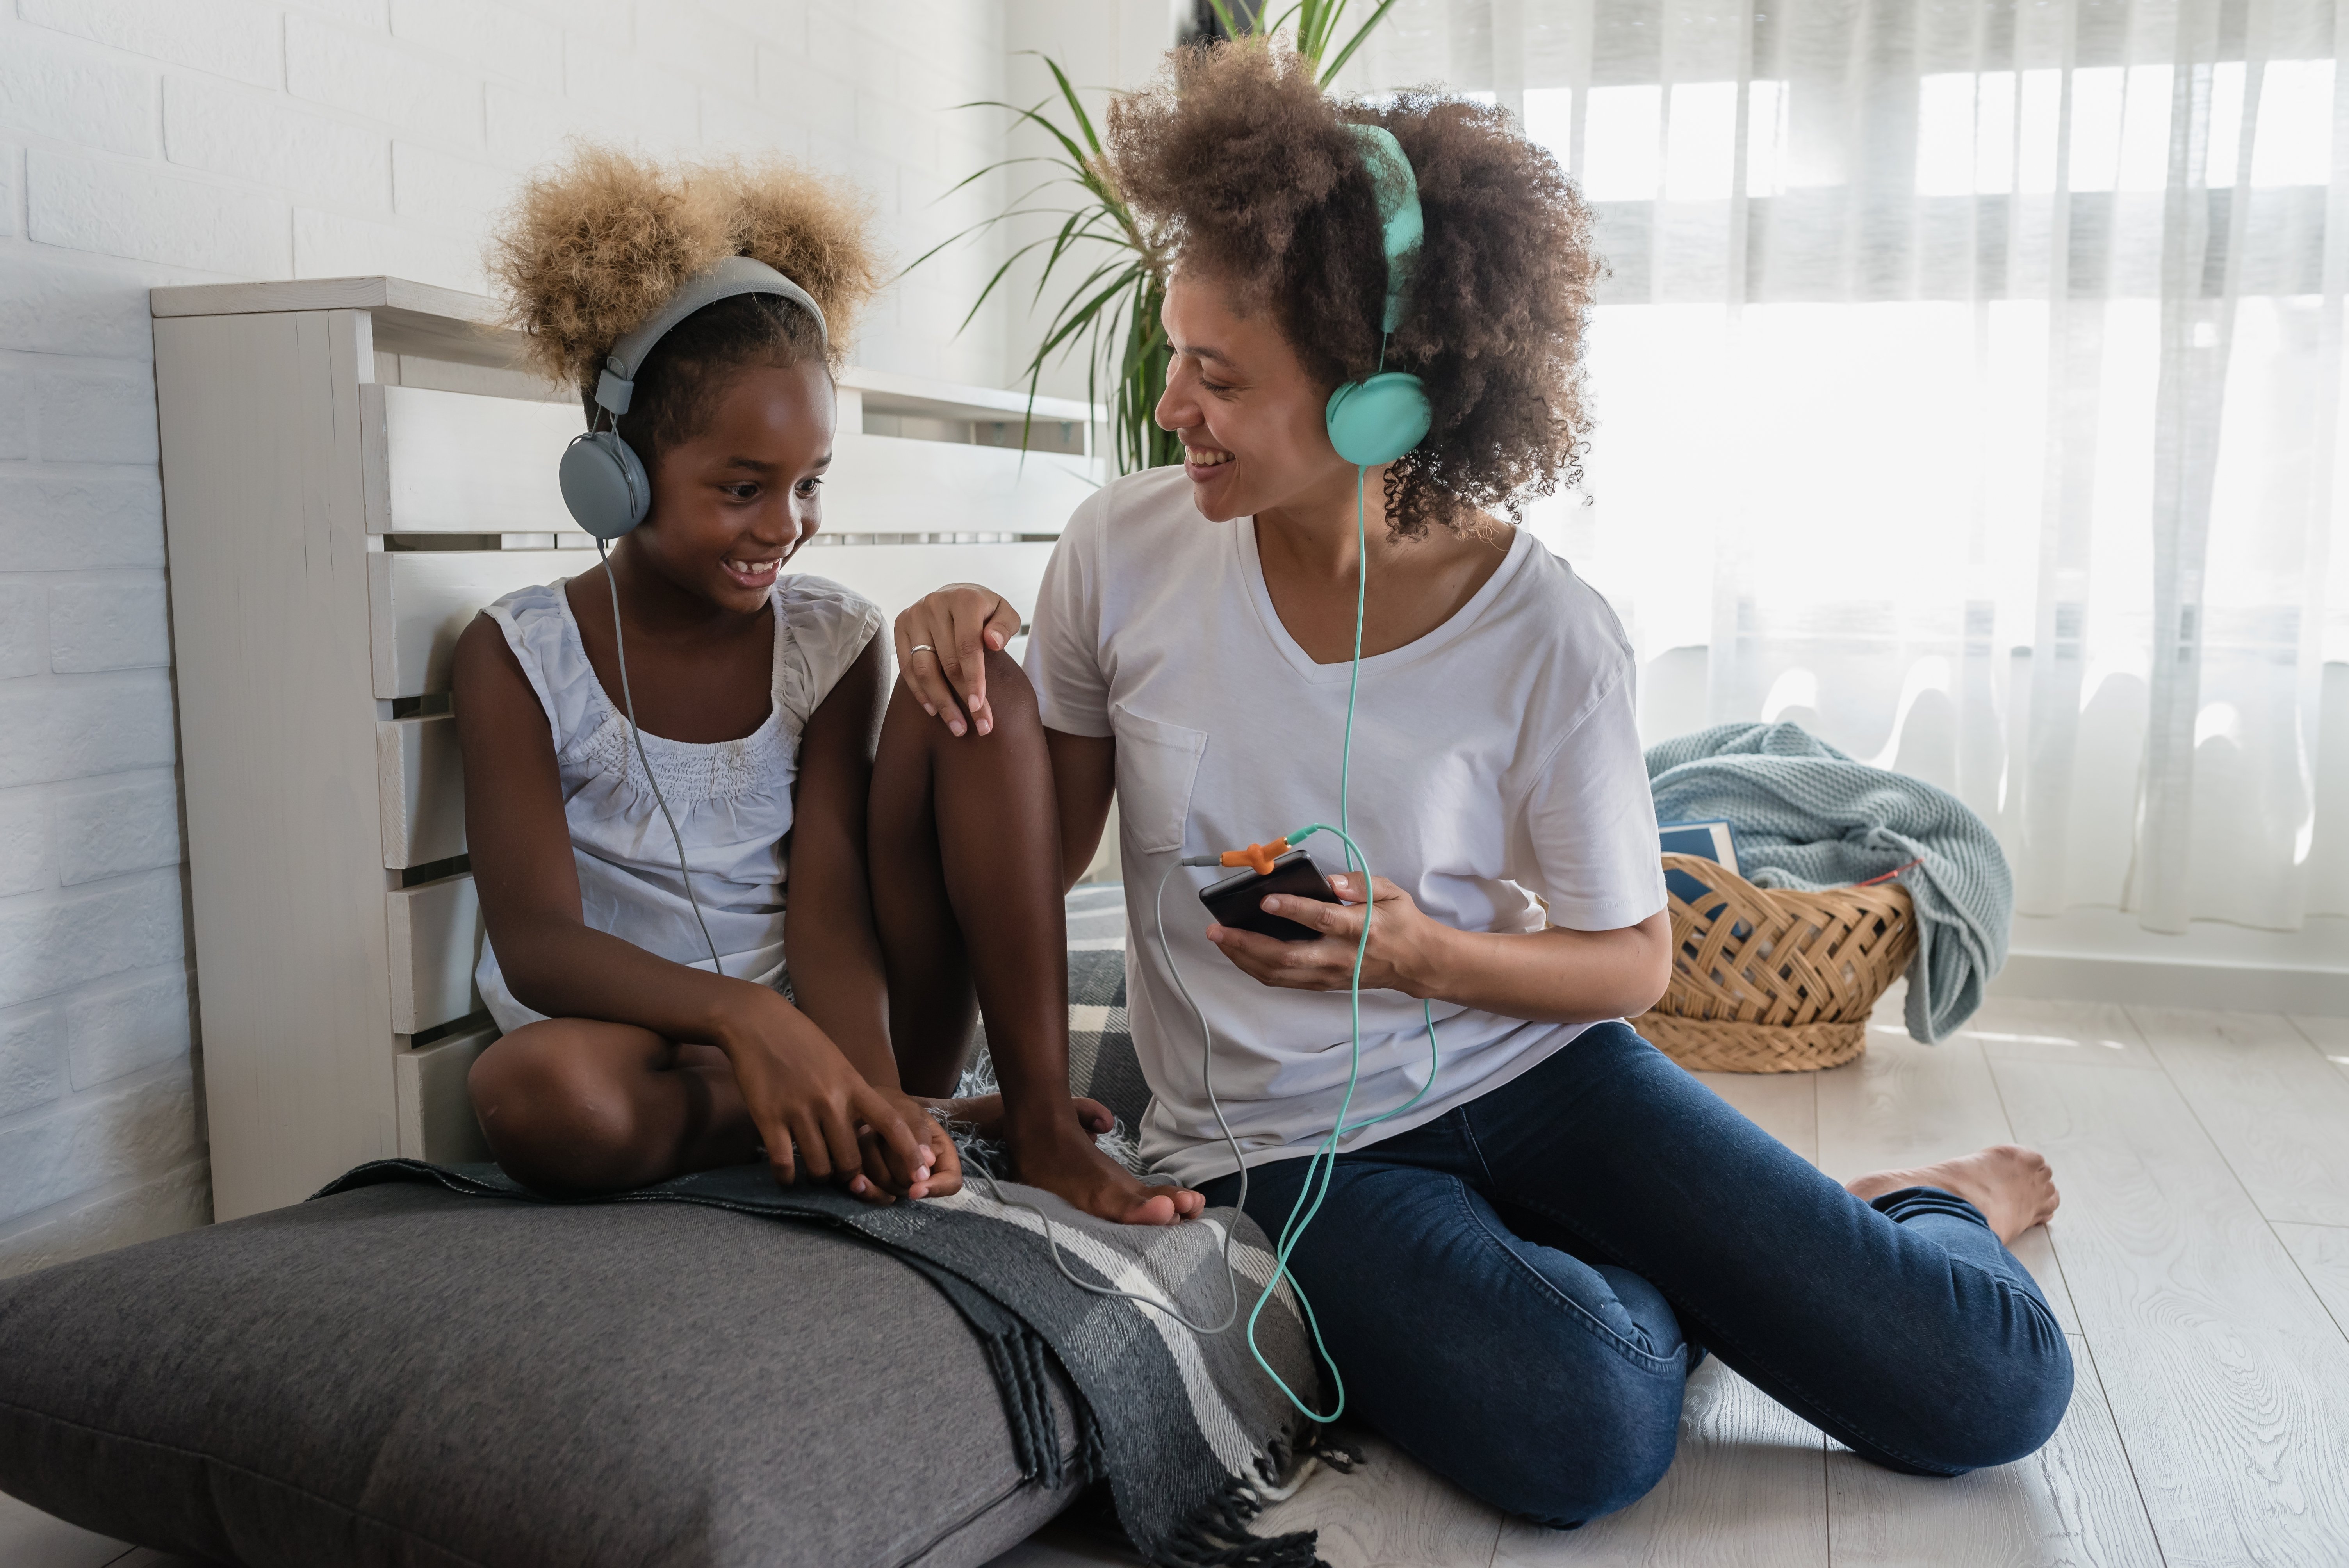 Mom and daughter with headphones on listening to music together